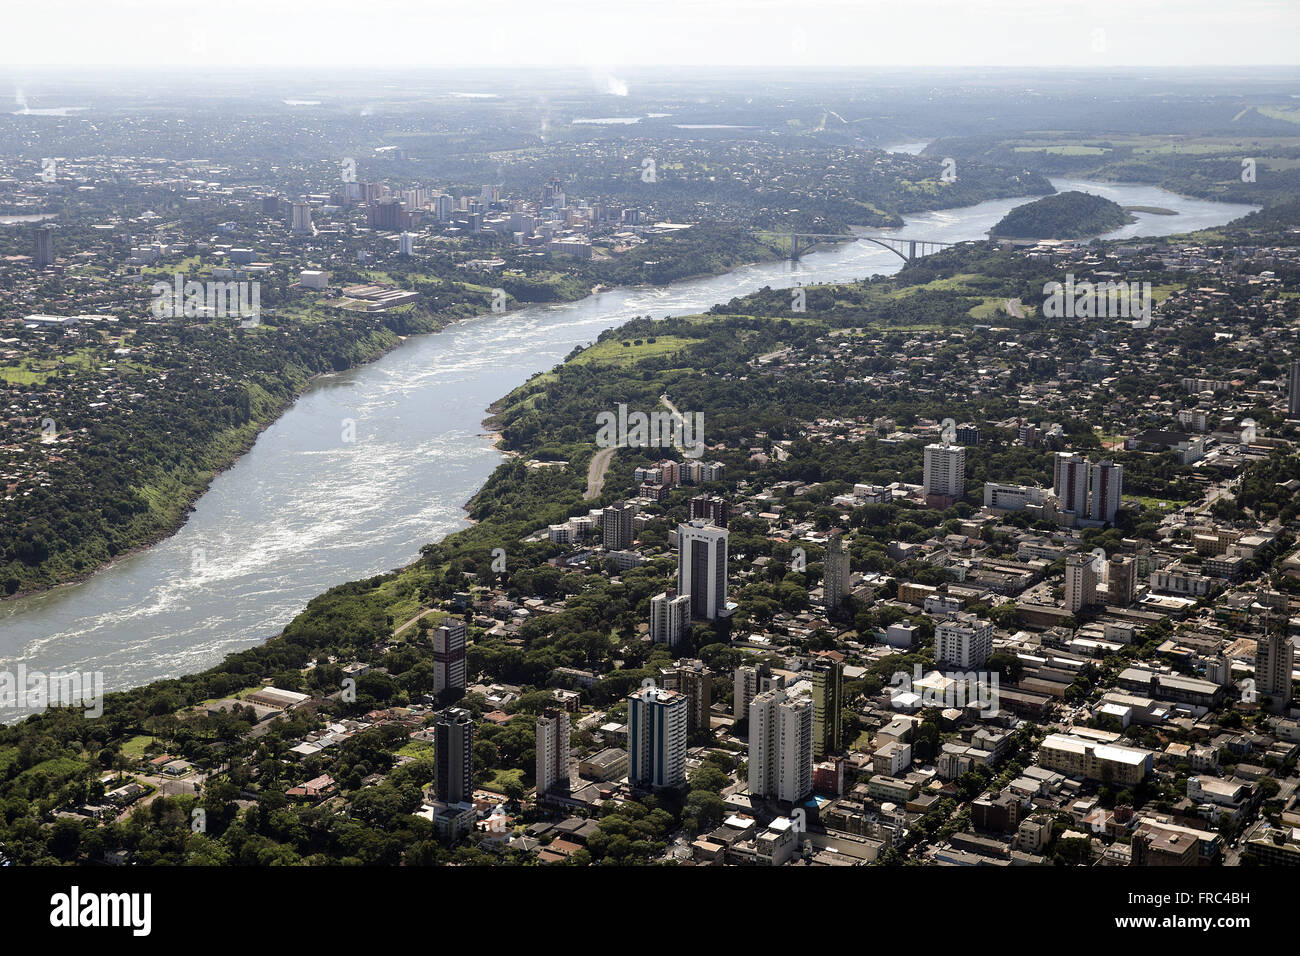 Aerial view of the Parana River Stock Photo